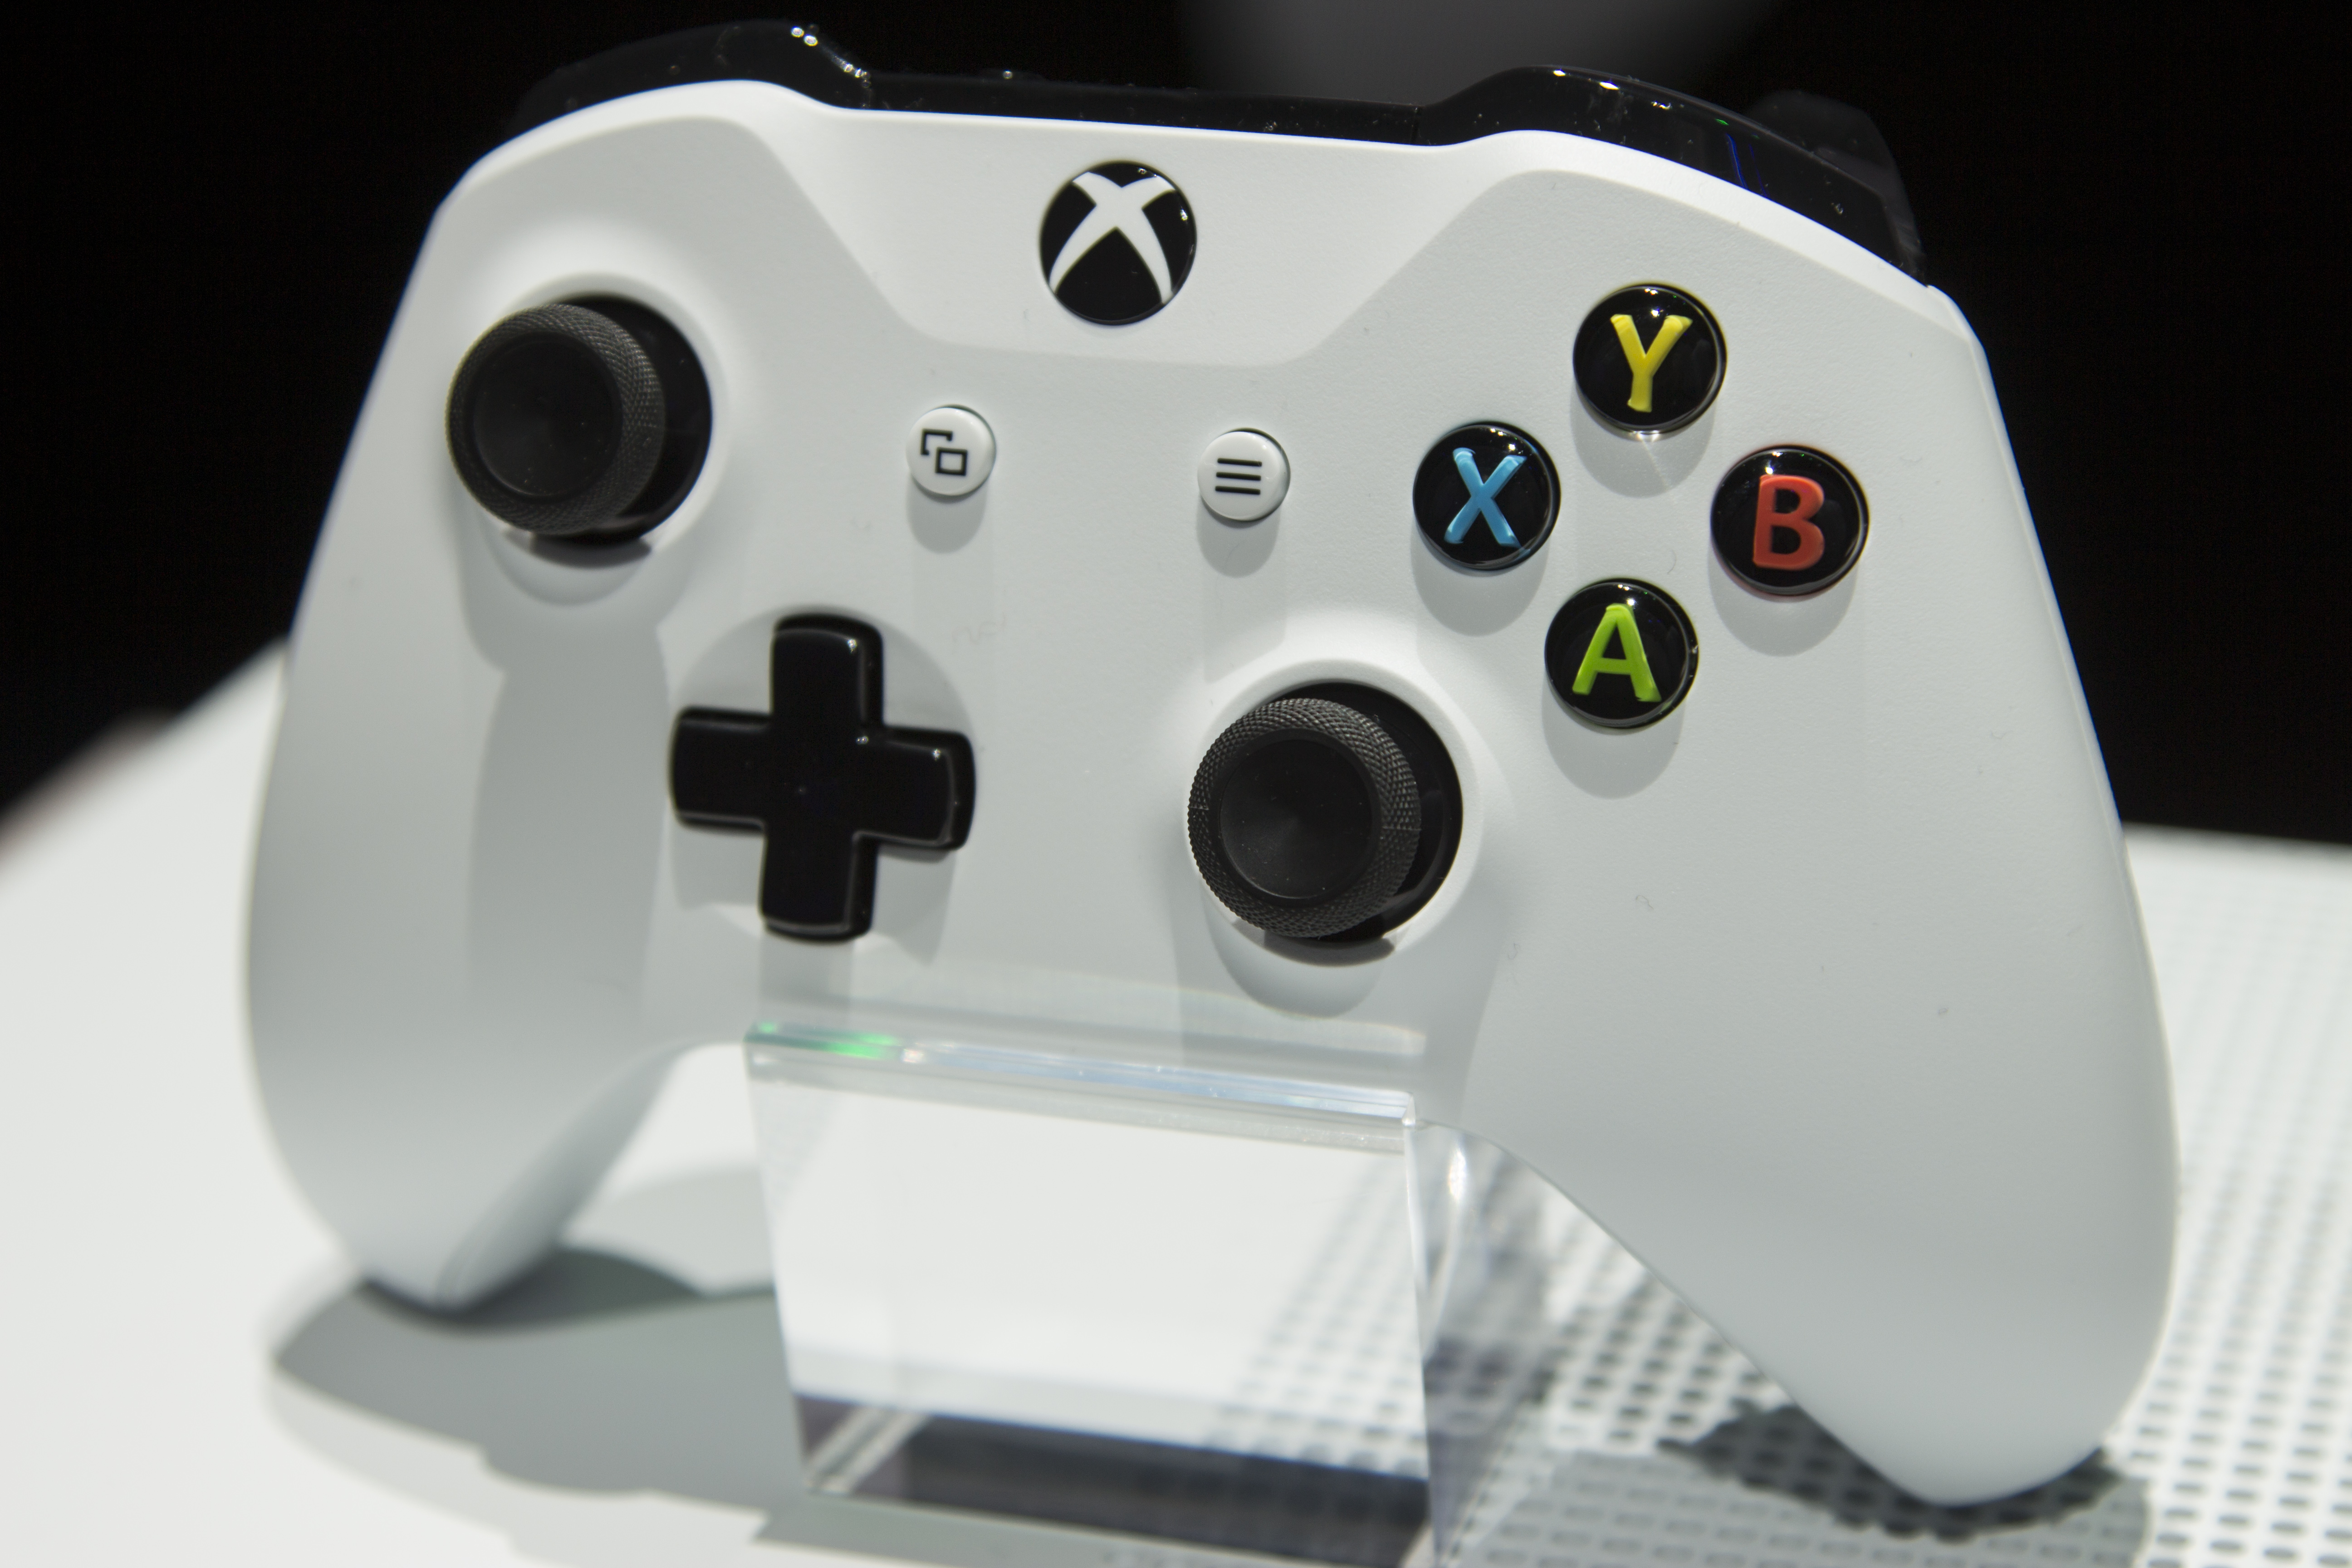 Microsoft Xbox One S review: Xbox One S is the best Xbox you might